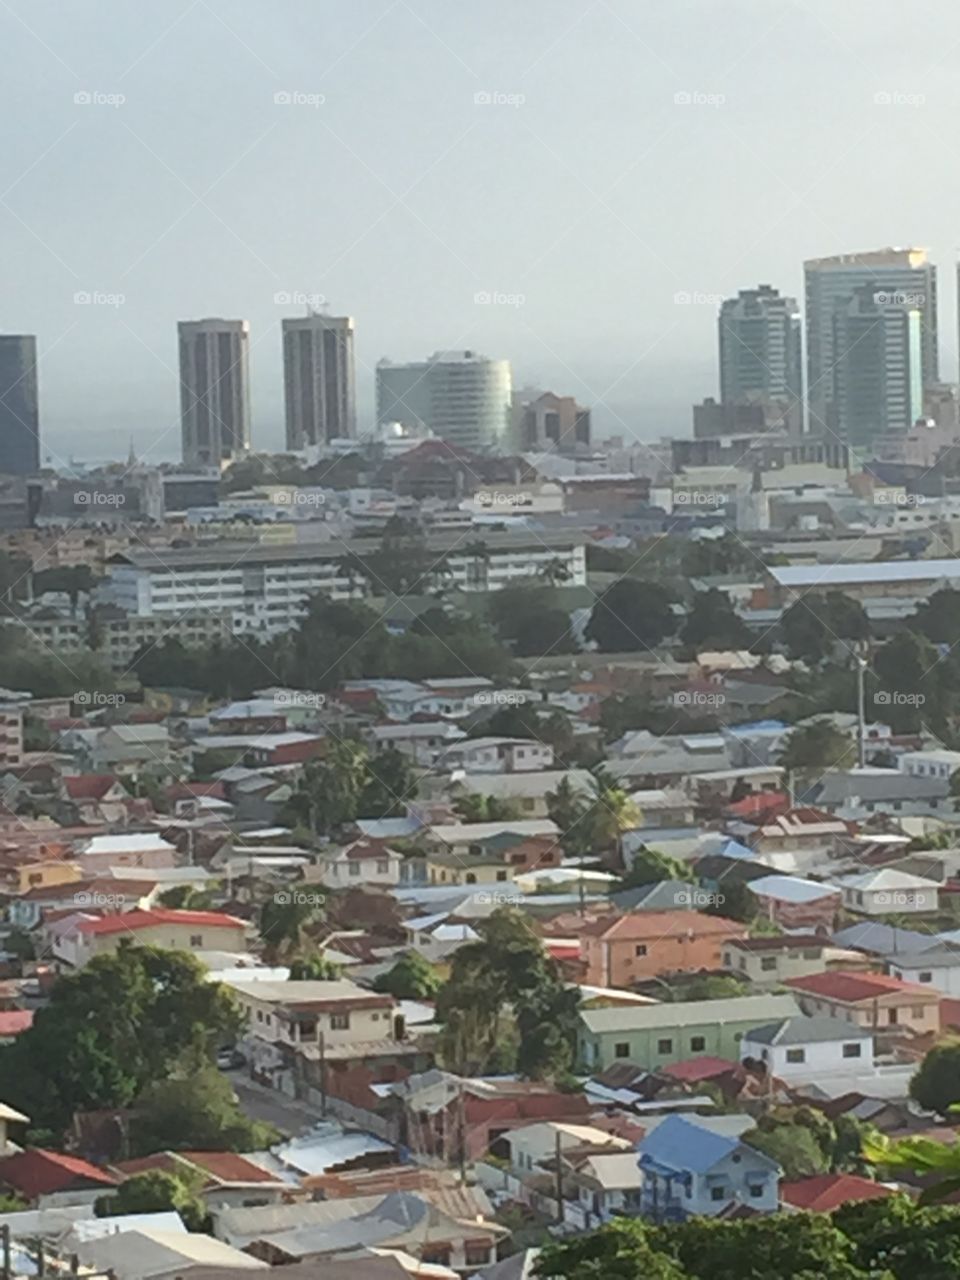 Views from on high. Port-of-Spain, Trinidad from the mountain top. 